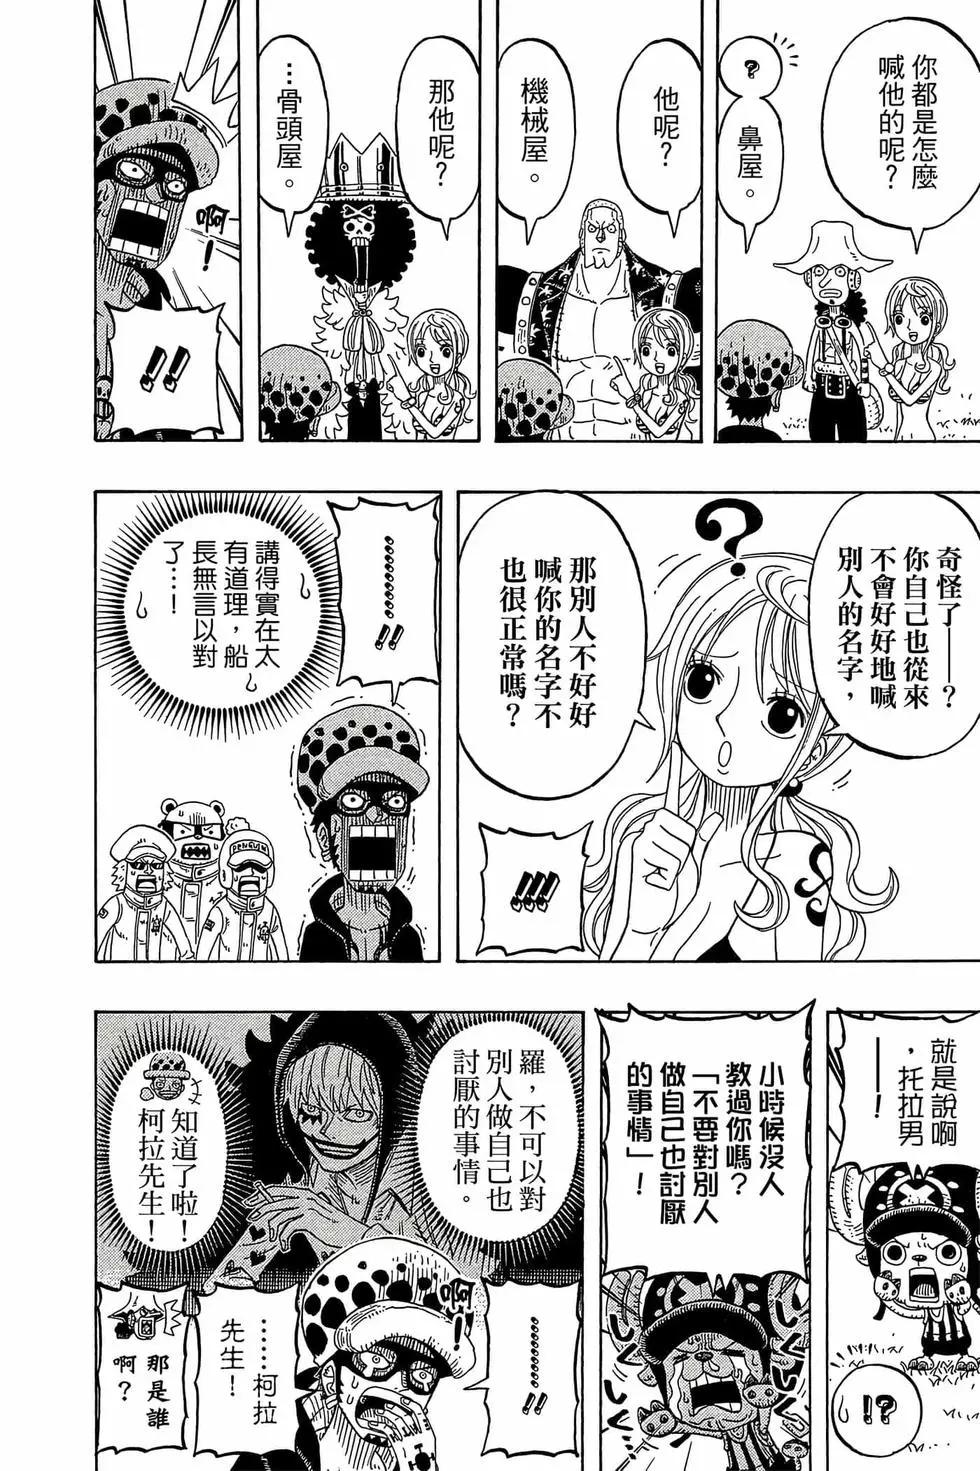 One piece party - 第02卷(1/4) - 7